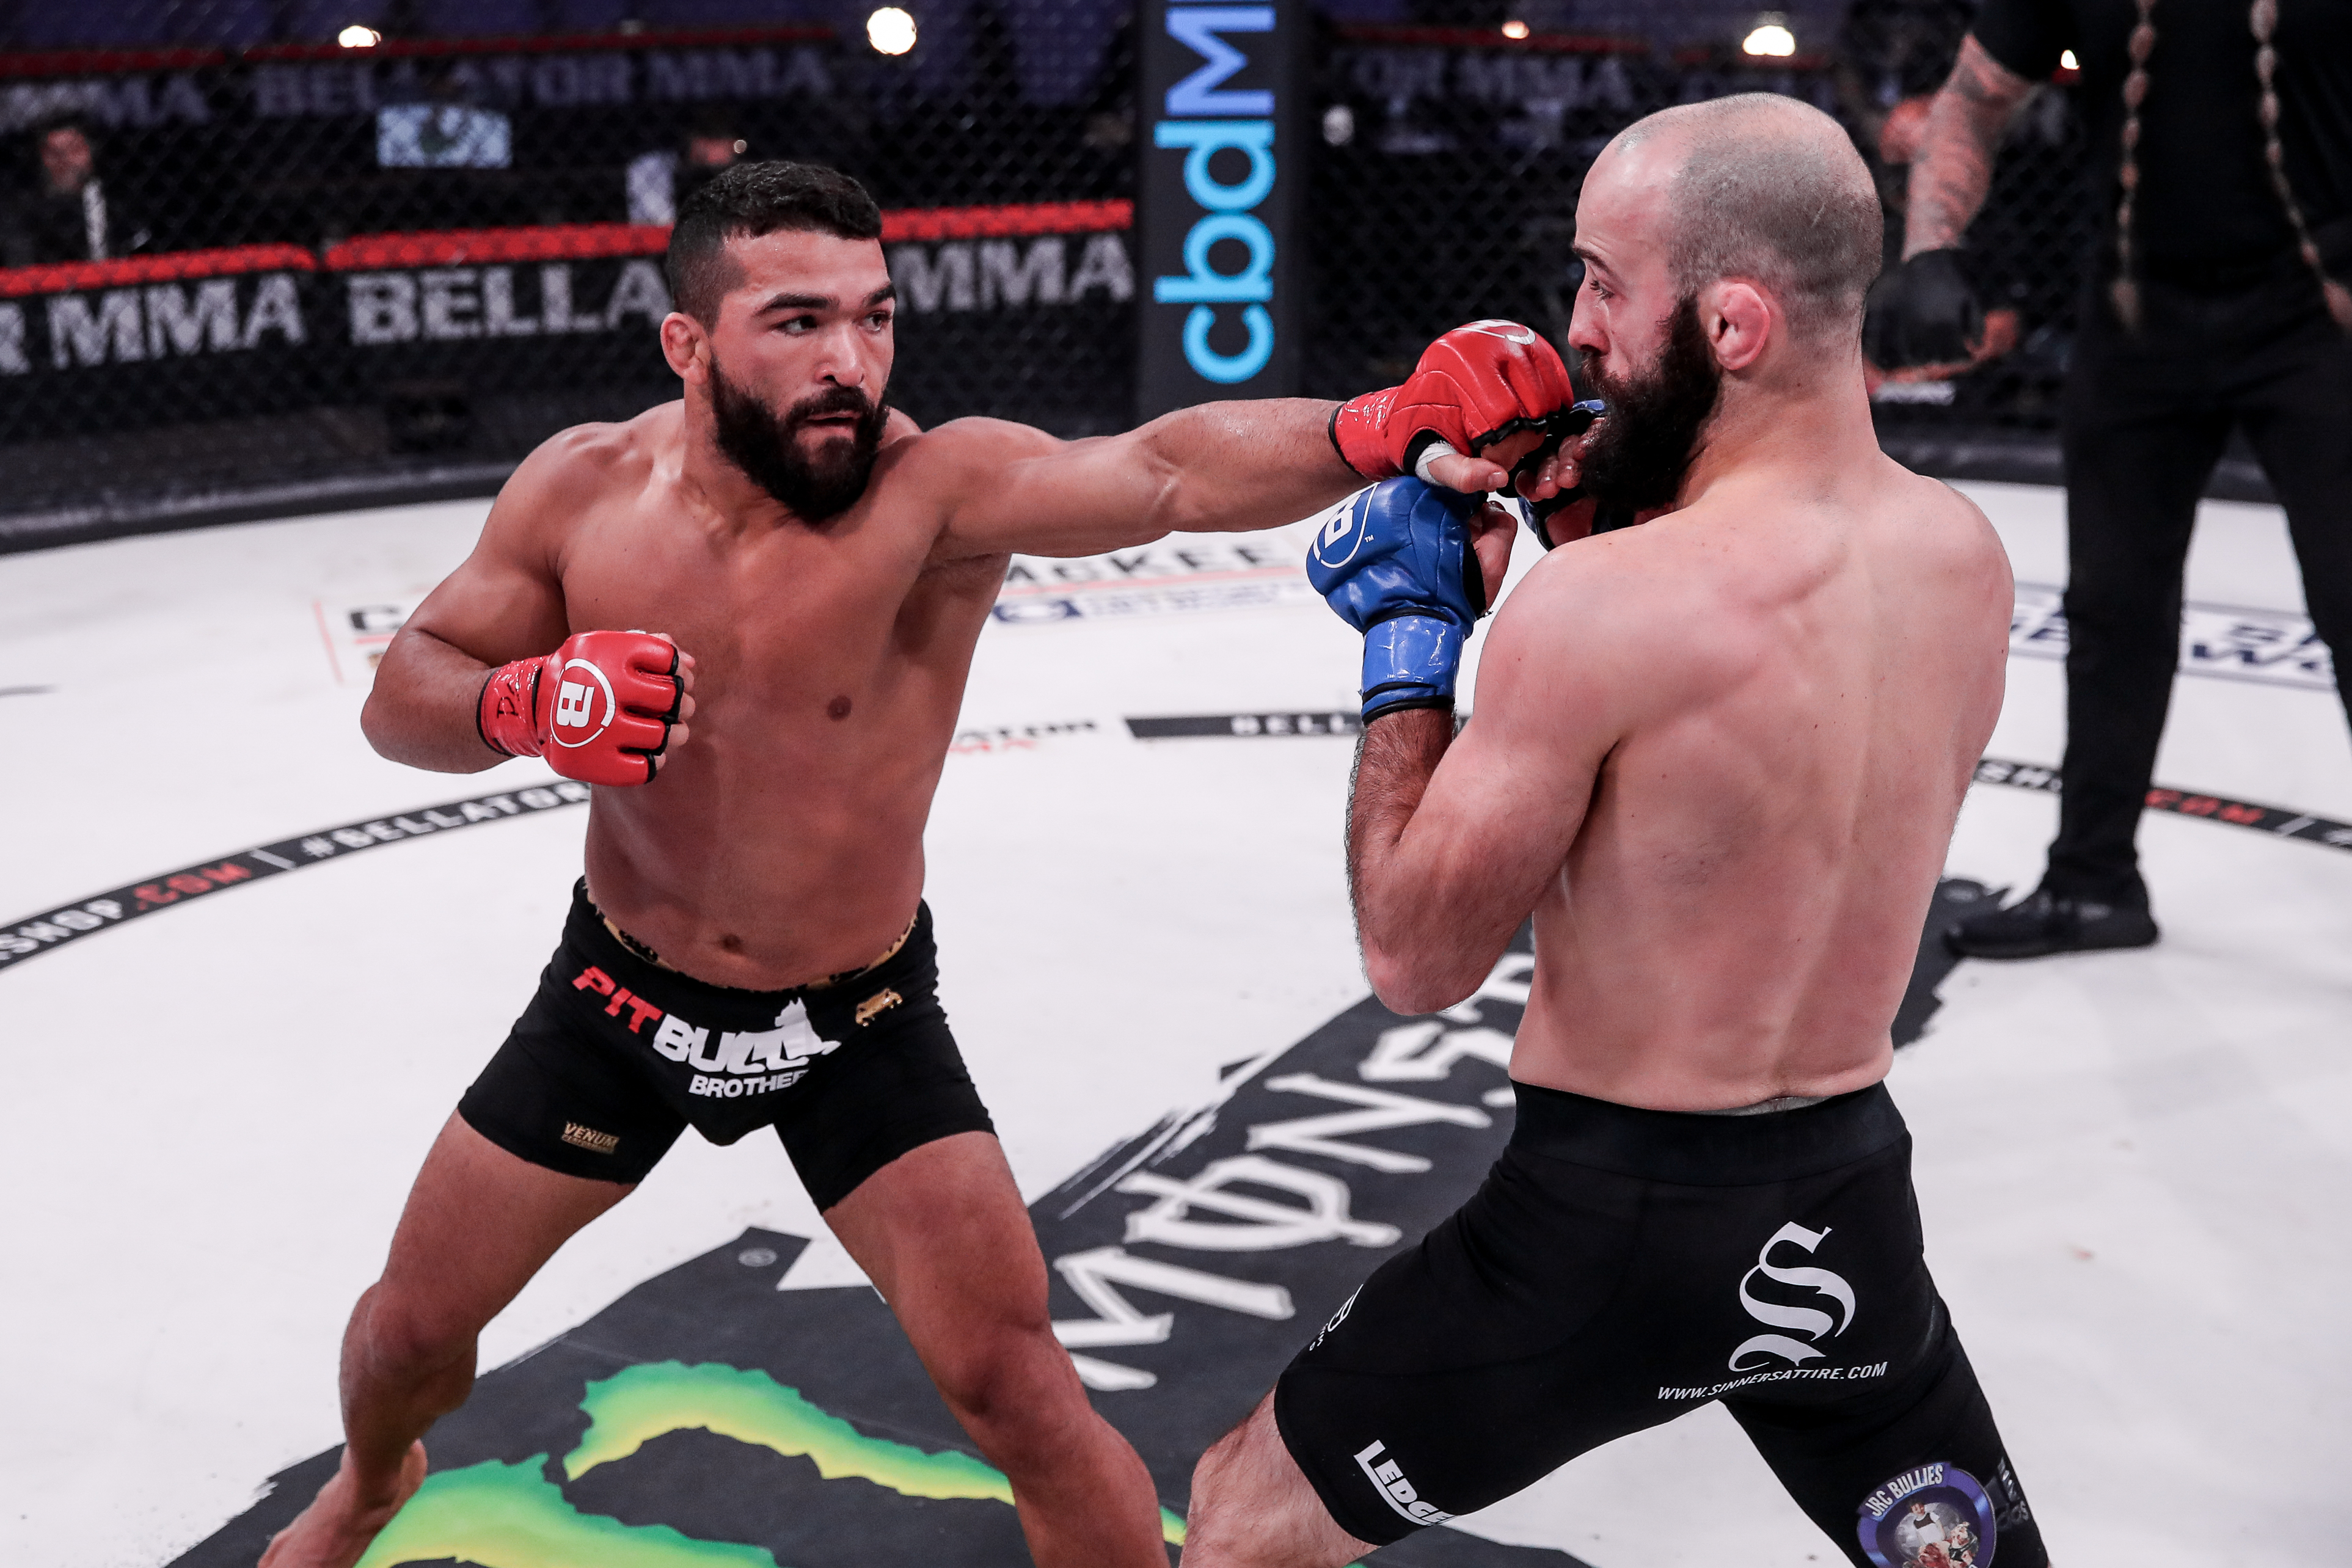 Showtime Taps Bellator MMA Events to Help Punch Up Subscribers Next TV